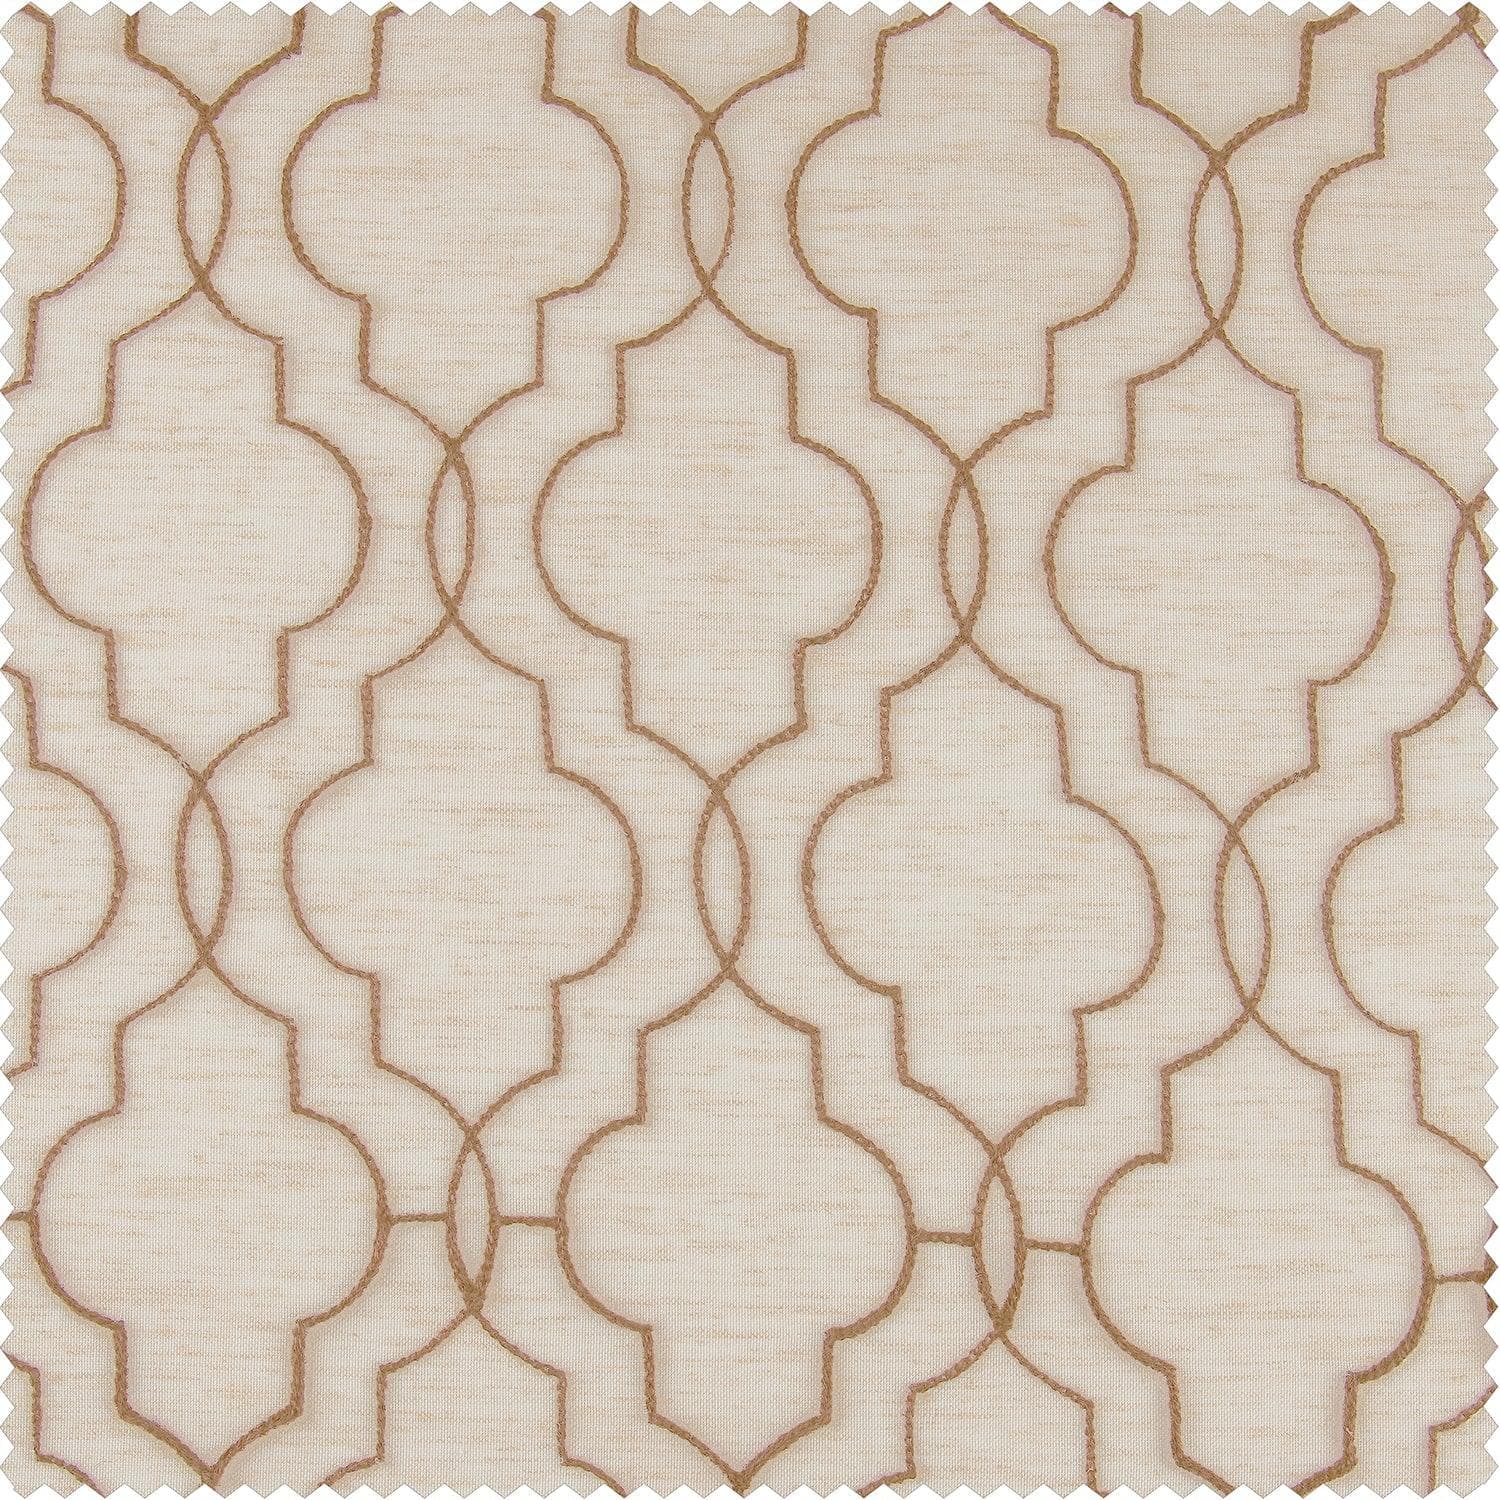 Saida Natural Embroidered Patterned Faux Linen Swatch